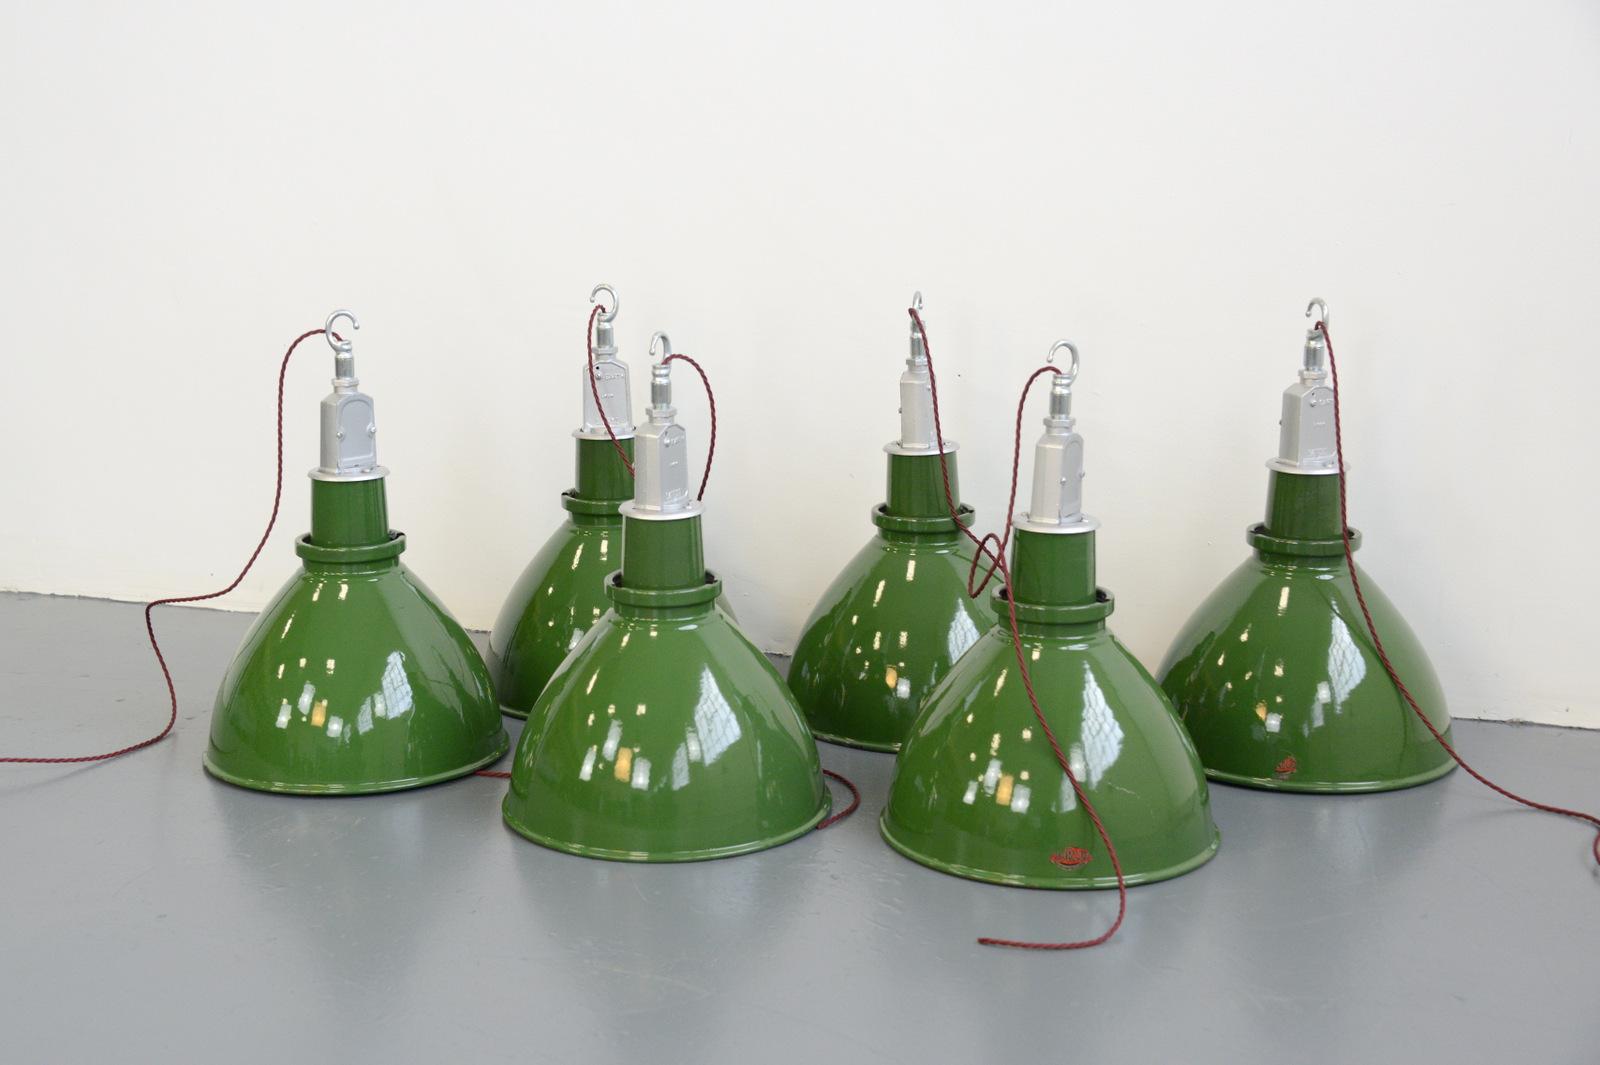 - Price is per light
- Vitreous green enamel shades
- White enamel inner reflectors
- Twist off tops
- Takes E27 fitting bulbs
- Comes with 100cm of red twist cable
- Comes with chain and ceiling hook
- Made by Thorlux
- English ~ 1950s
-